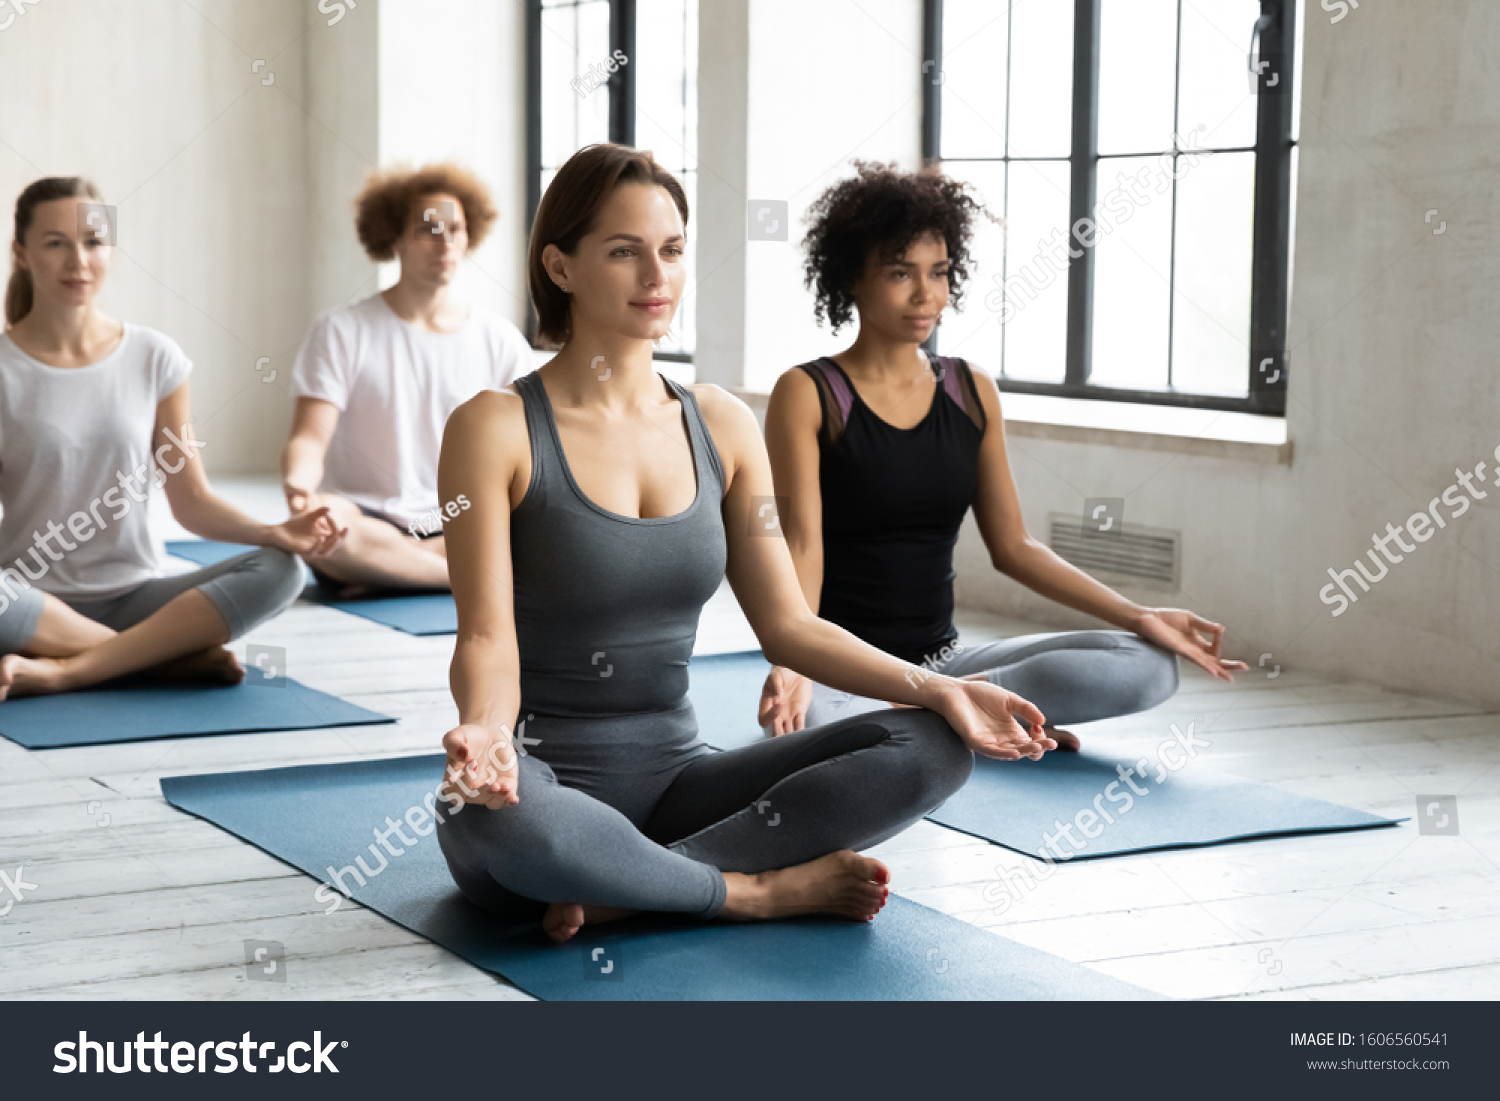 Diverse young people sitting in Easy Seat pose on mats, practicing yoga at group lesson, meditating in Sukhasana exercise, working out in modern yoga studio, stress relief and wellness #1606560541